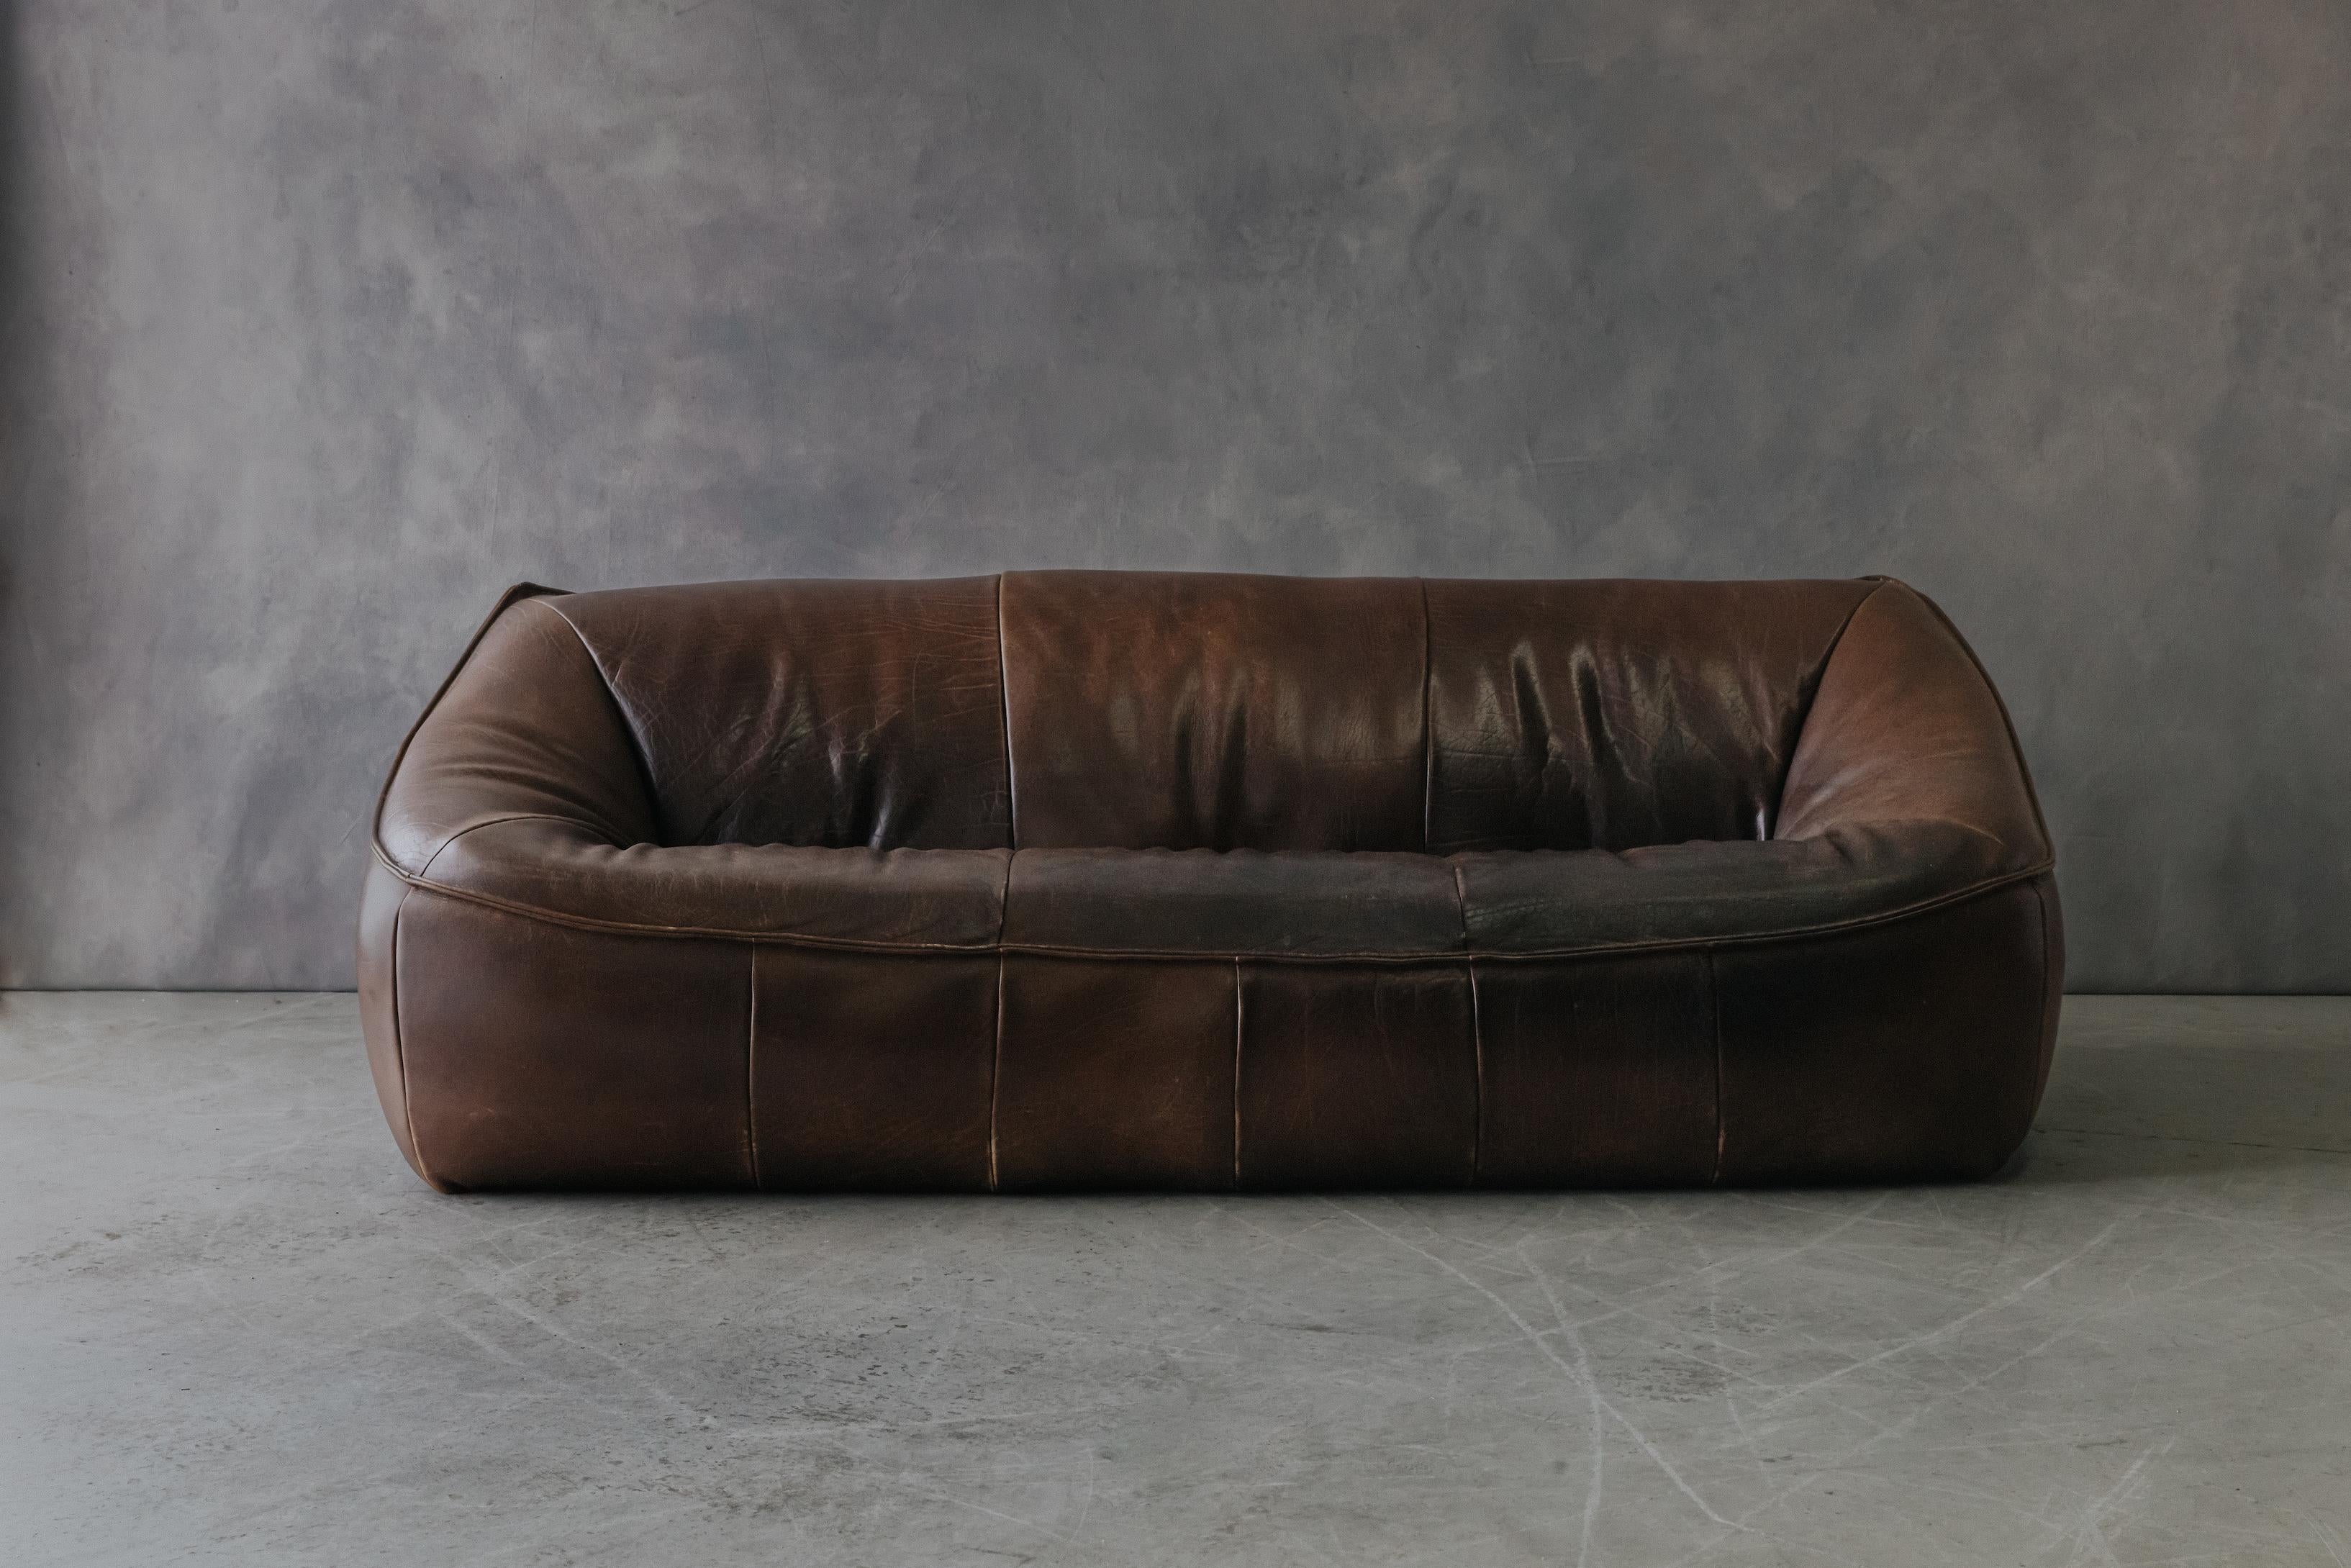 Gerard Van Den Berg Sofa 'Ringo', for Montis, The Netherlands, 1970s.  Wooden construction, covered with thick patinated leather.  Very comfortable model with superb original patina and use.